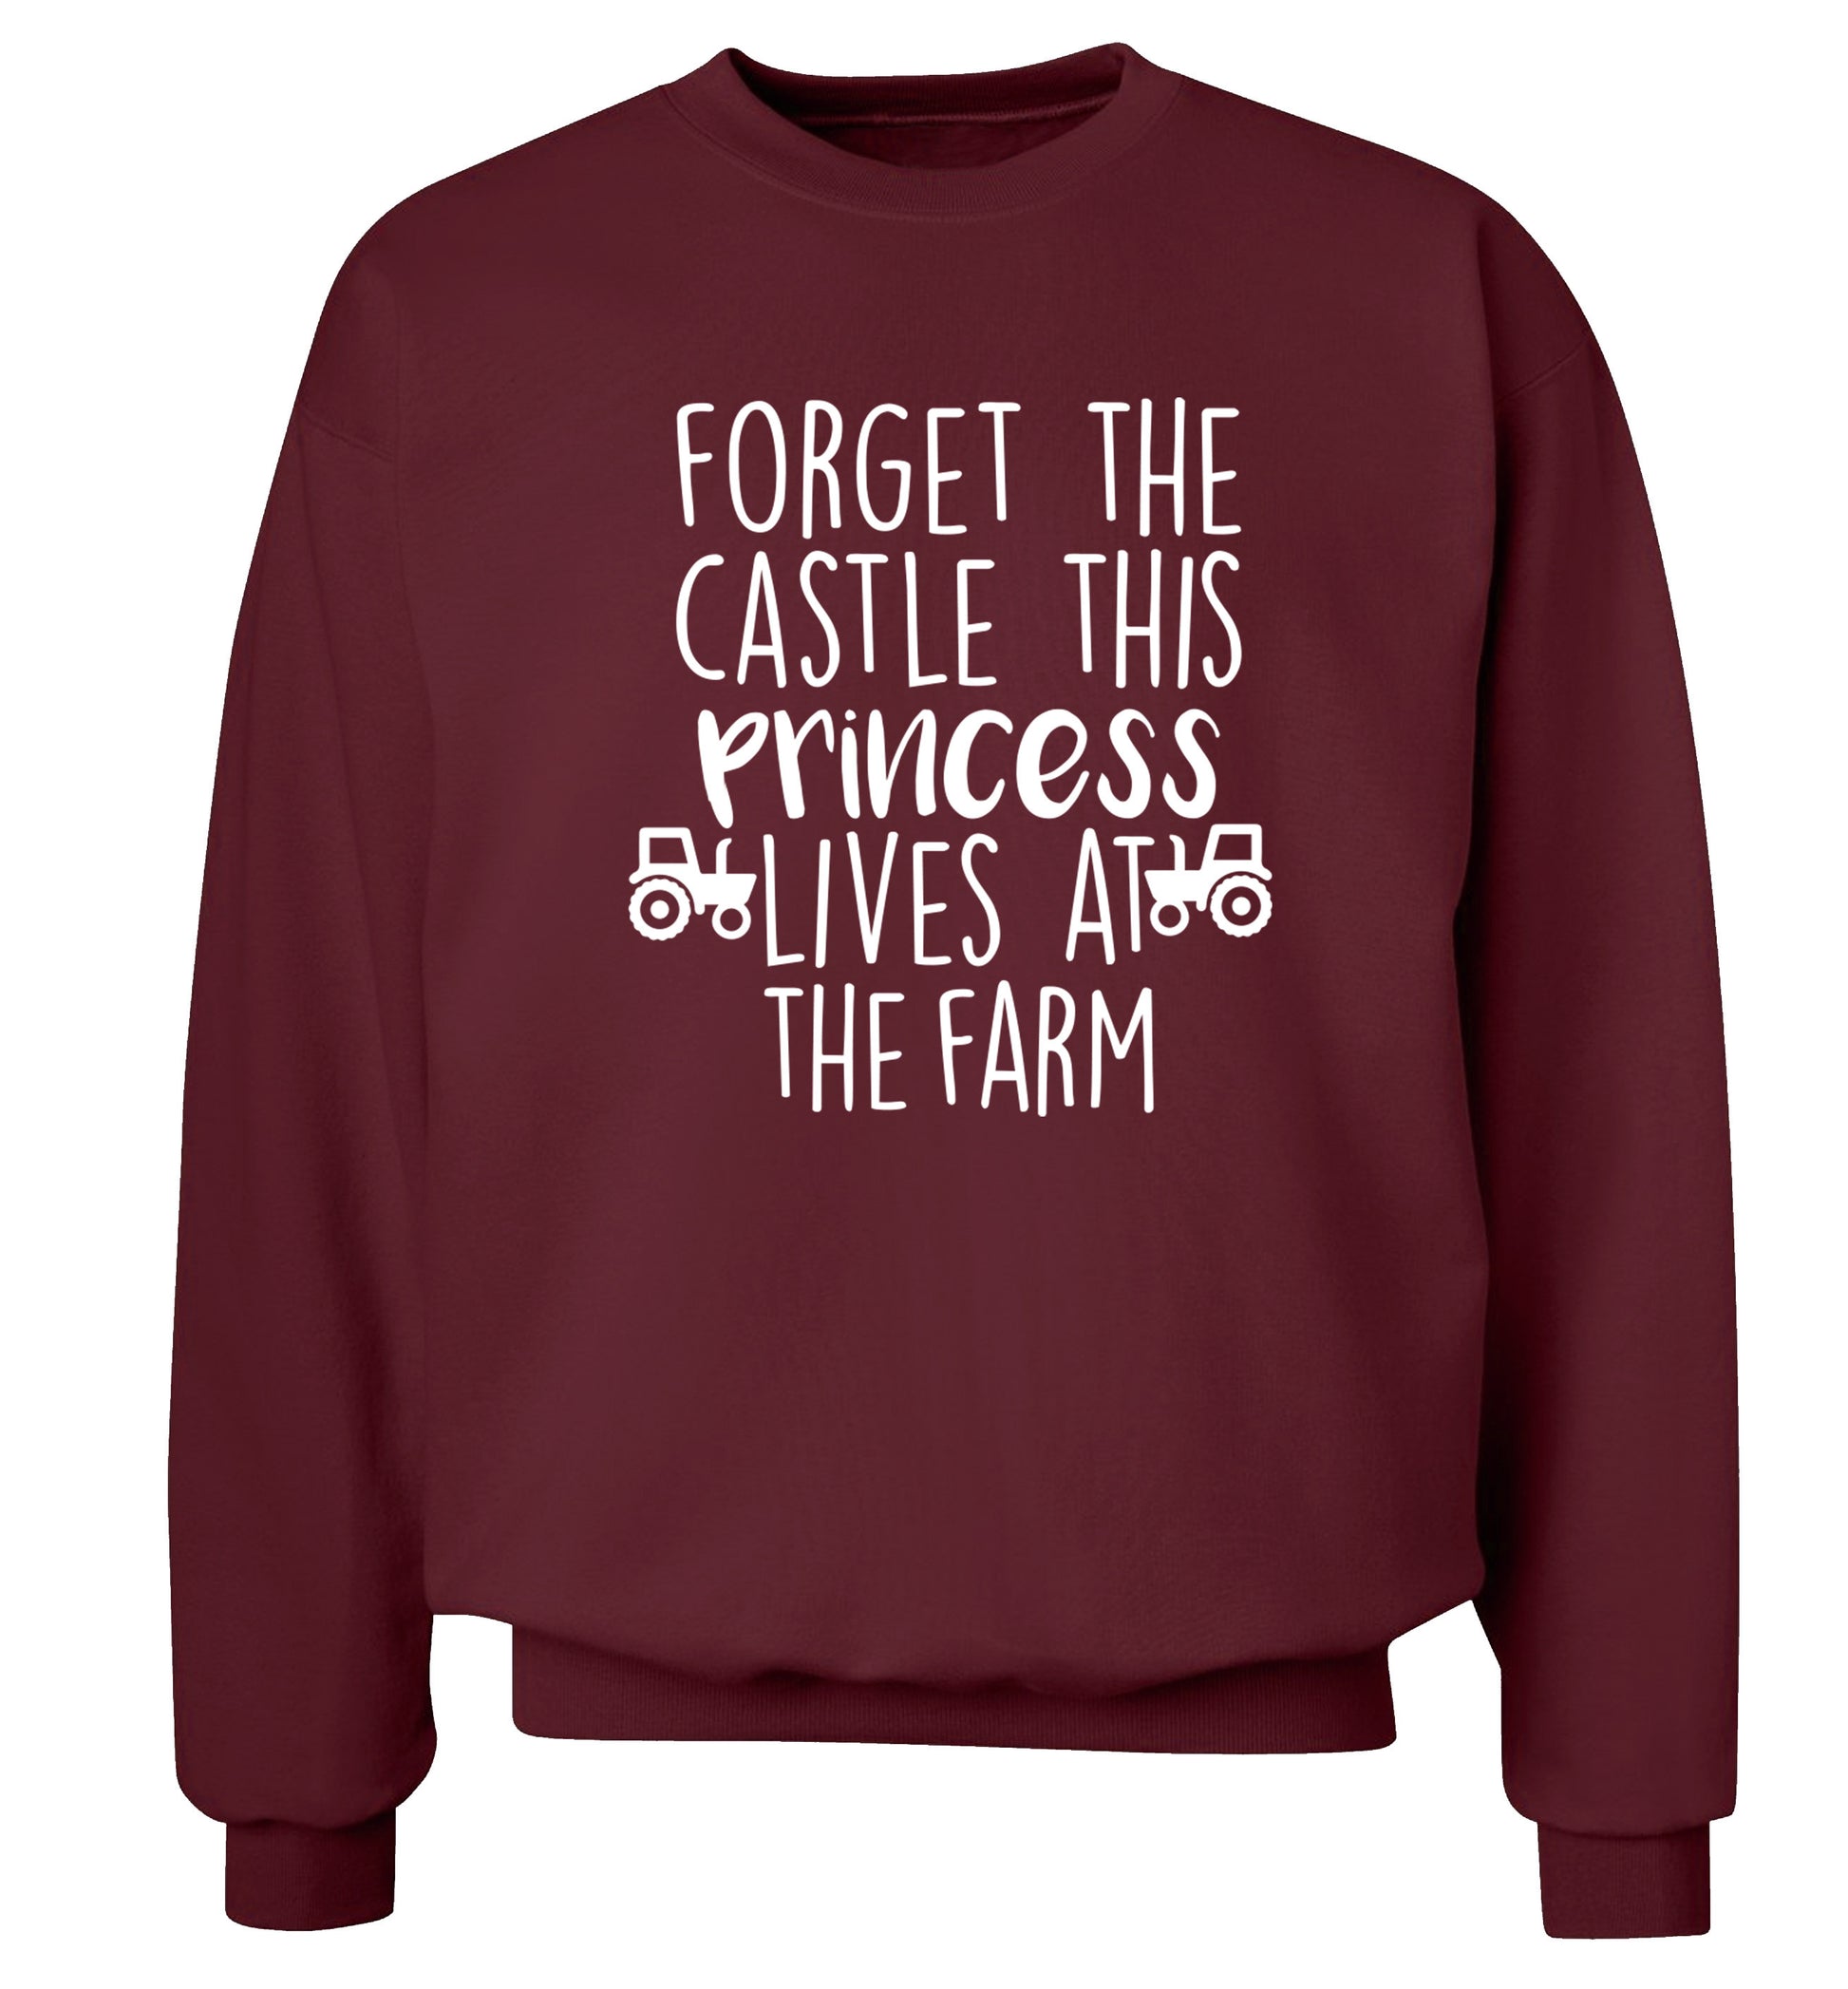 Forget the castle this princess lives at the farm Adult's unisex maroon Sweater 2XL